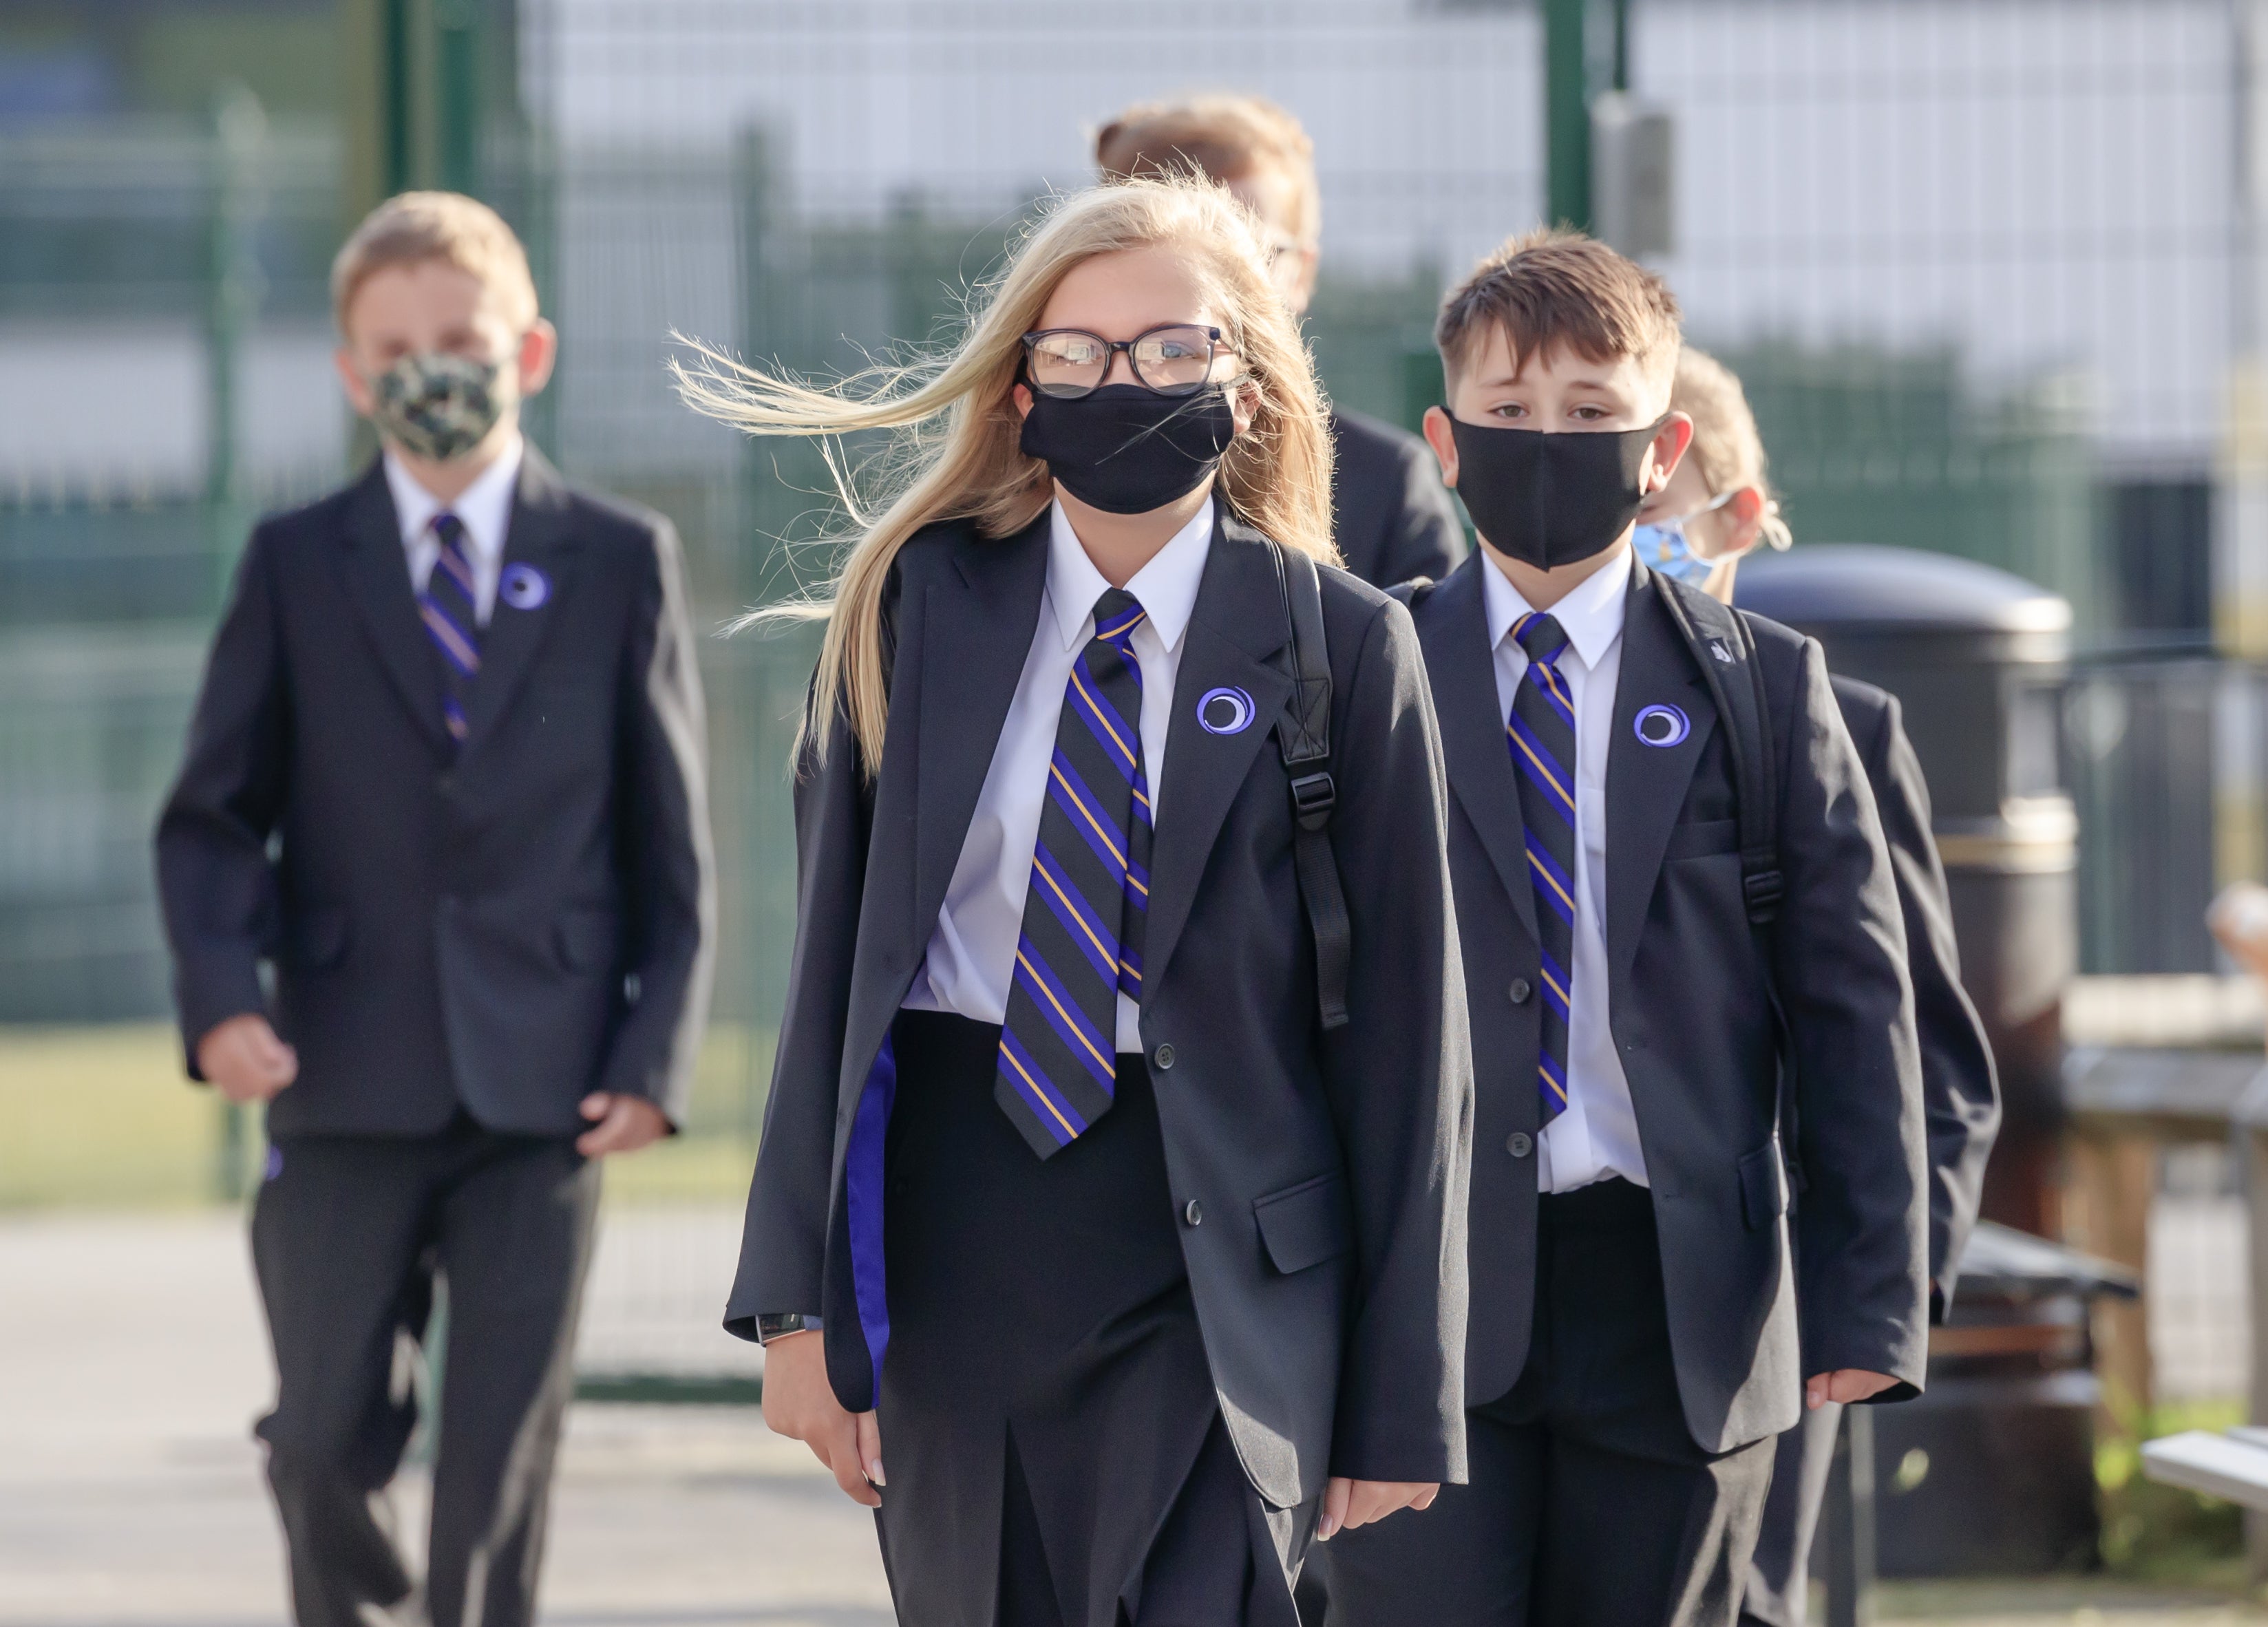 Pupils wear masks at Outwood Academy Adwick in Doncaster